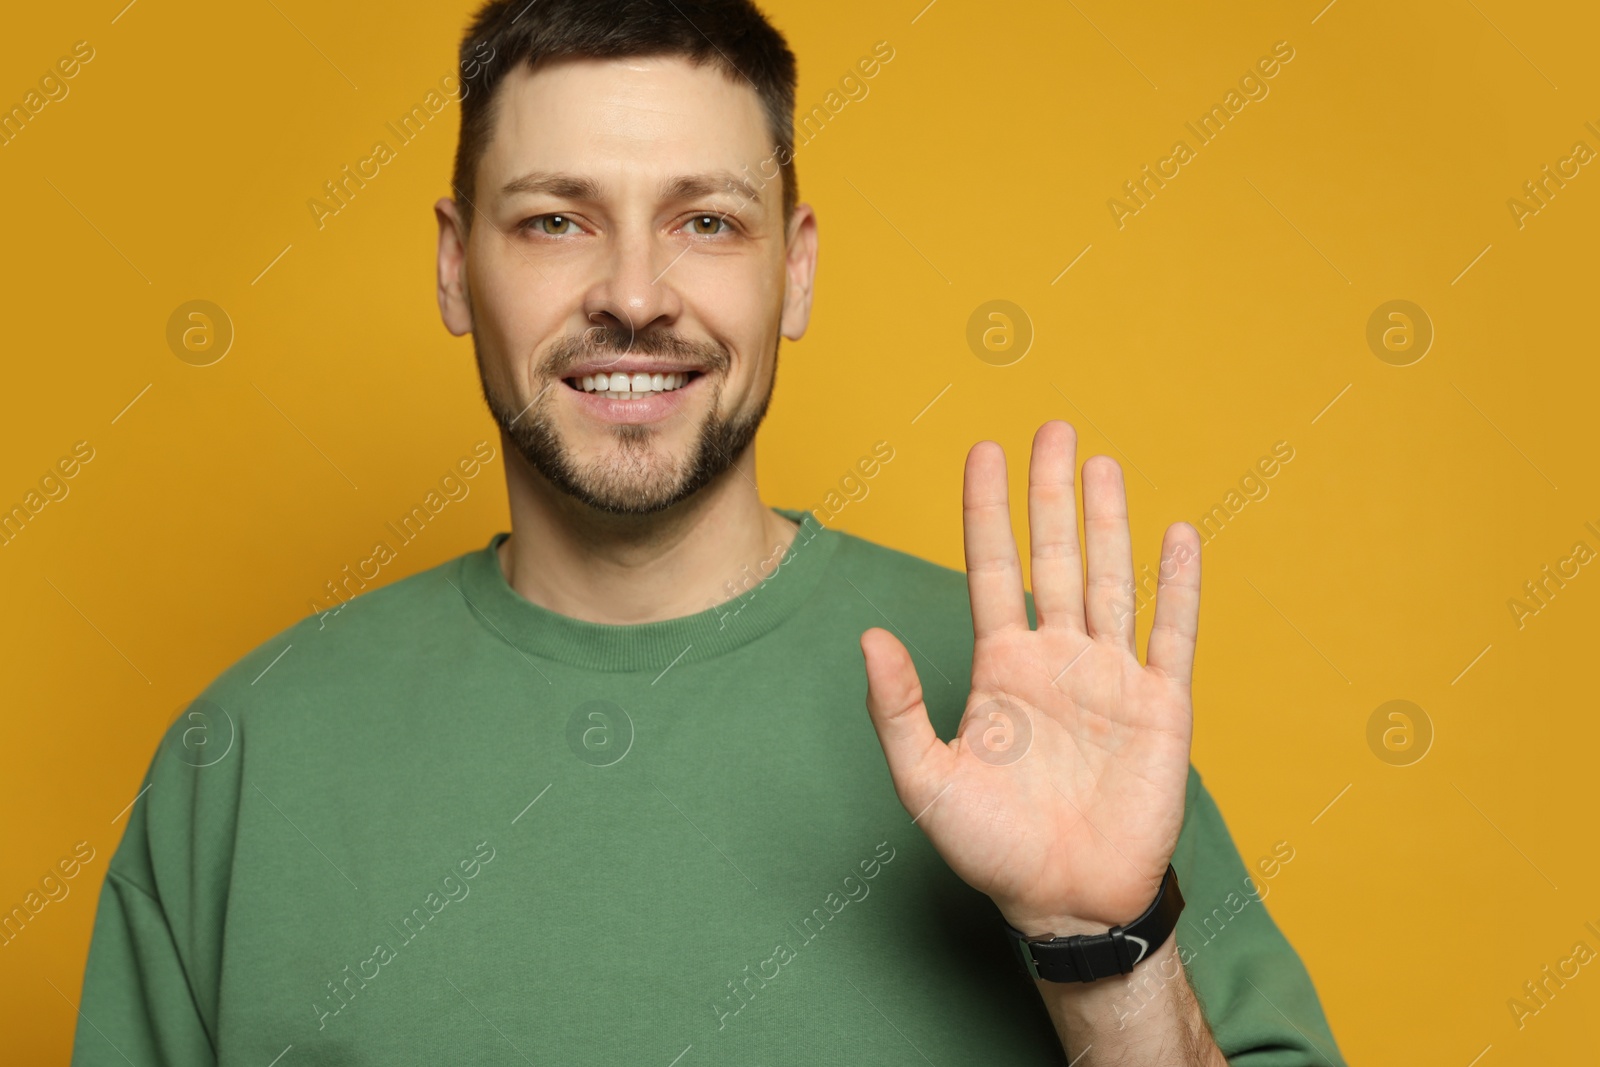 Photo of Left-handed man with open palm on yellow background